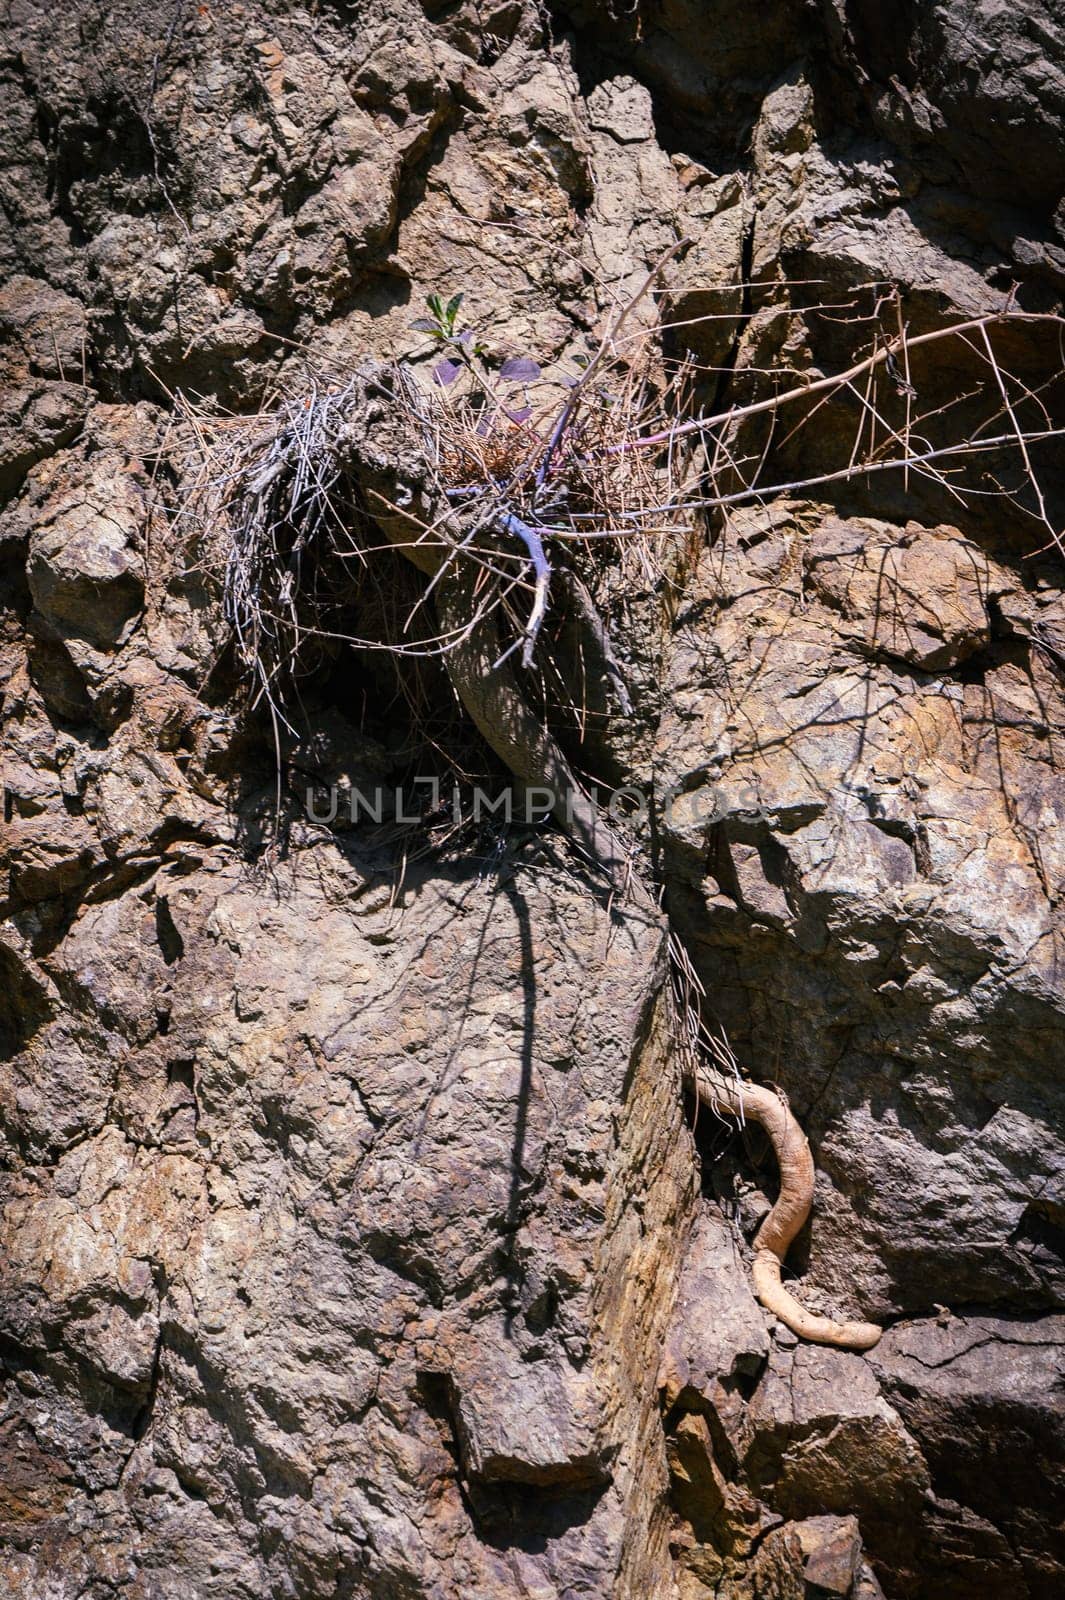 Plant roots exposed on rocks